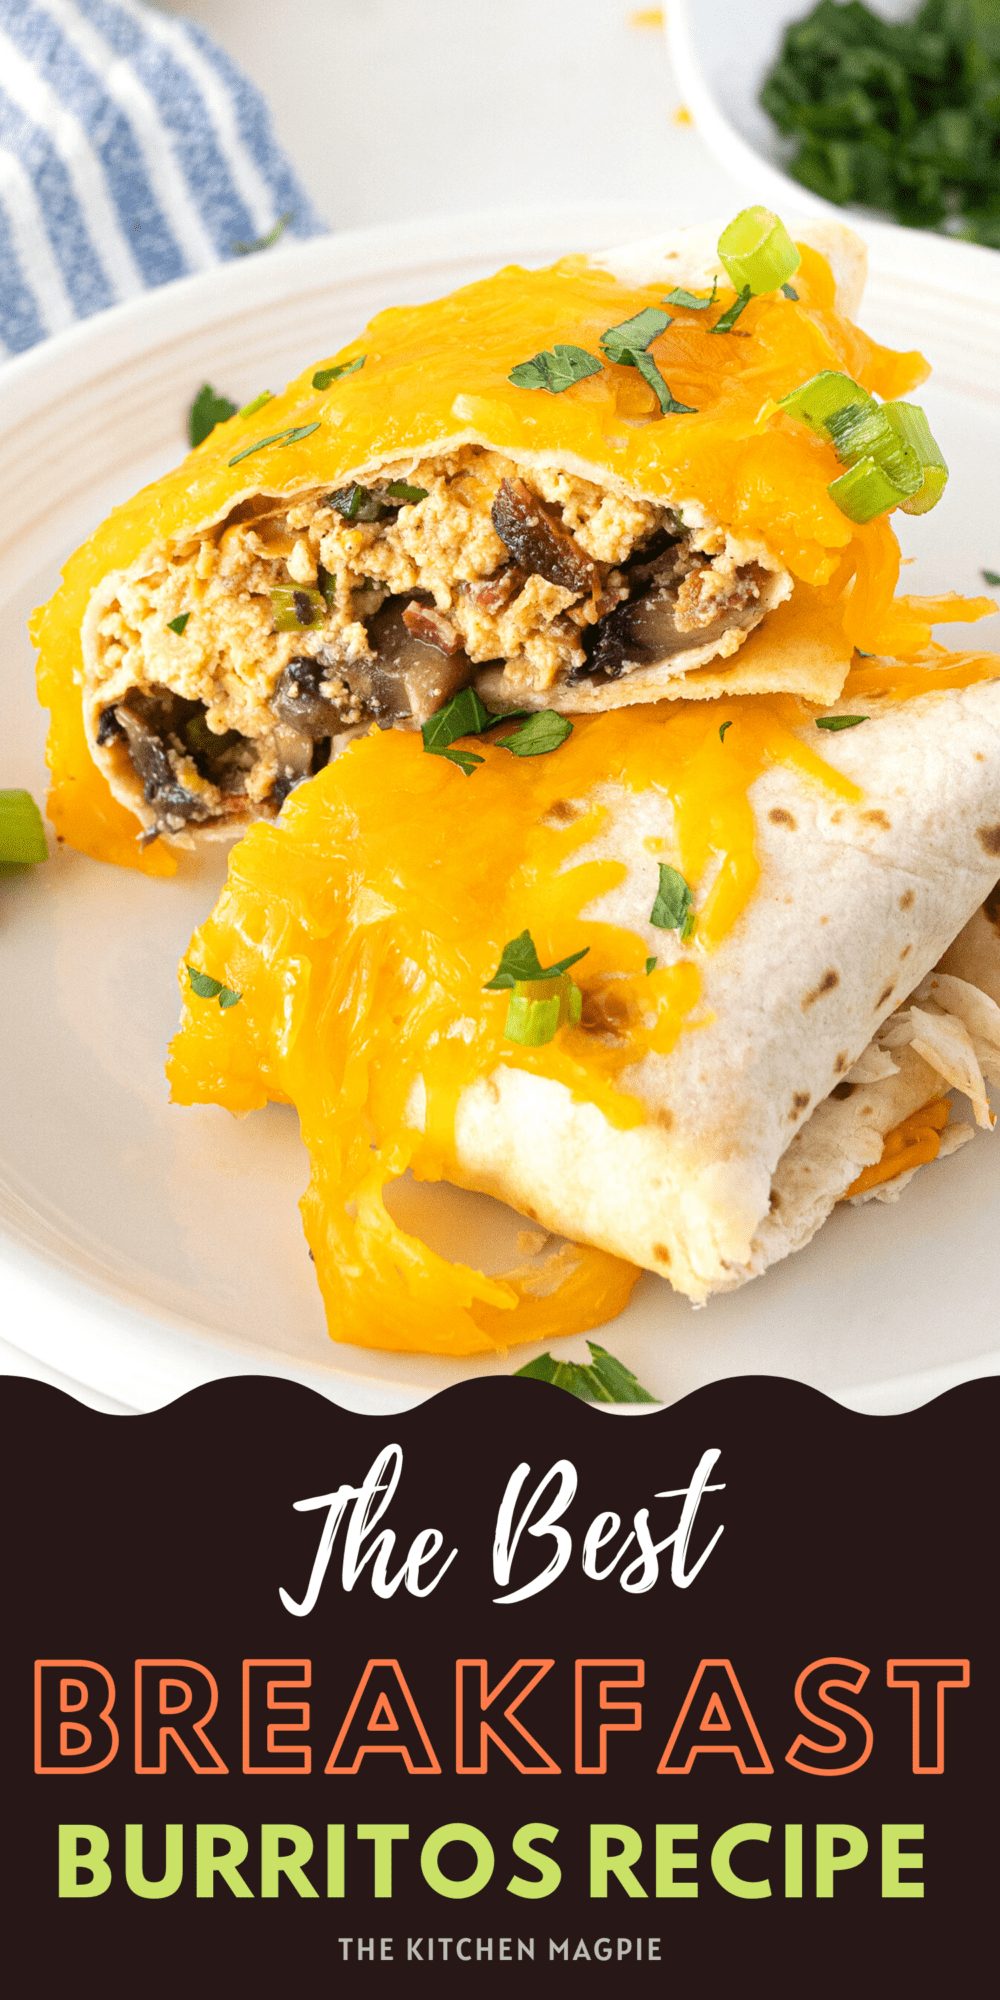 Breakfast burritos are the perfect way to start your day. Packed with protein and vegetables, a homemade burrito is sure to power you all the way through until lunchtime.